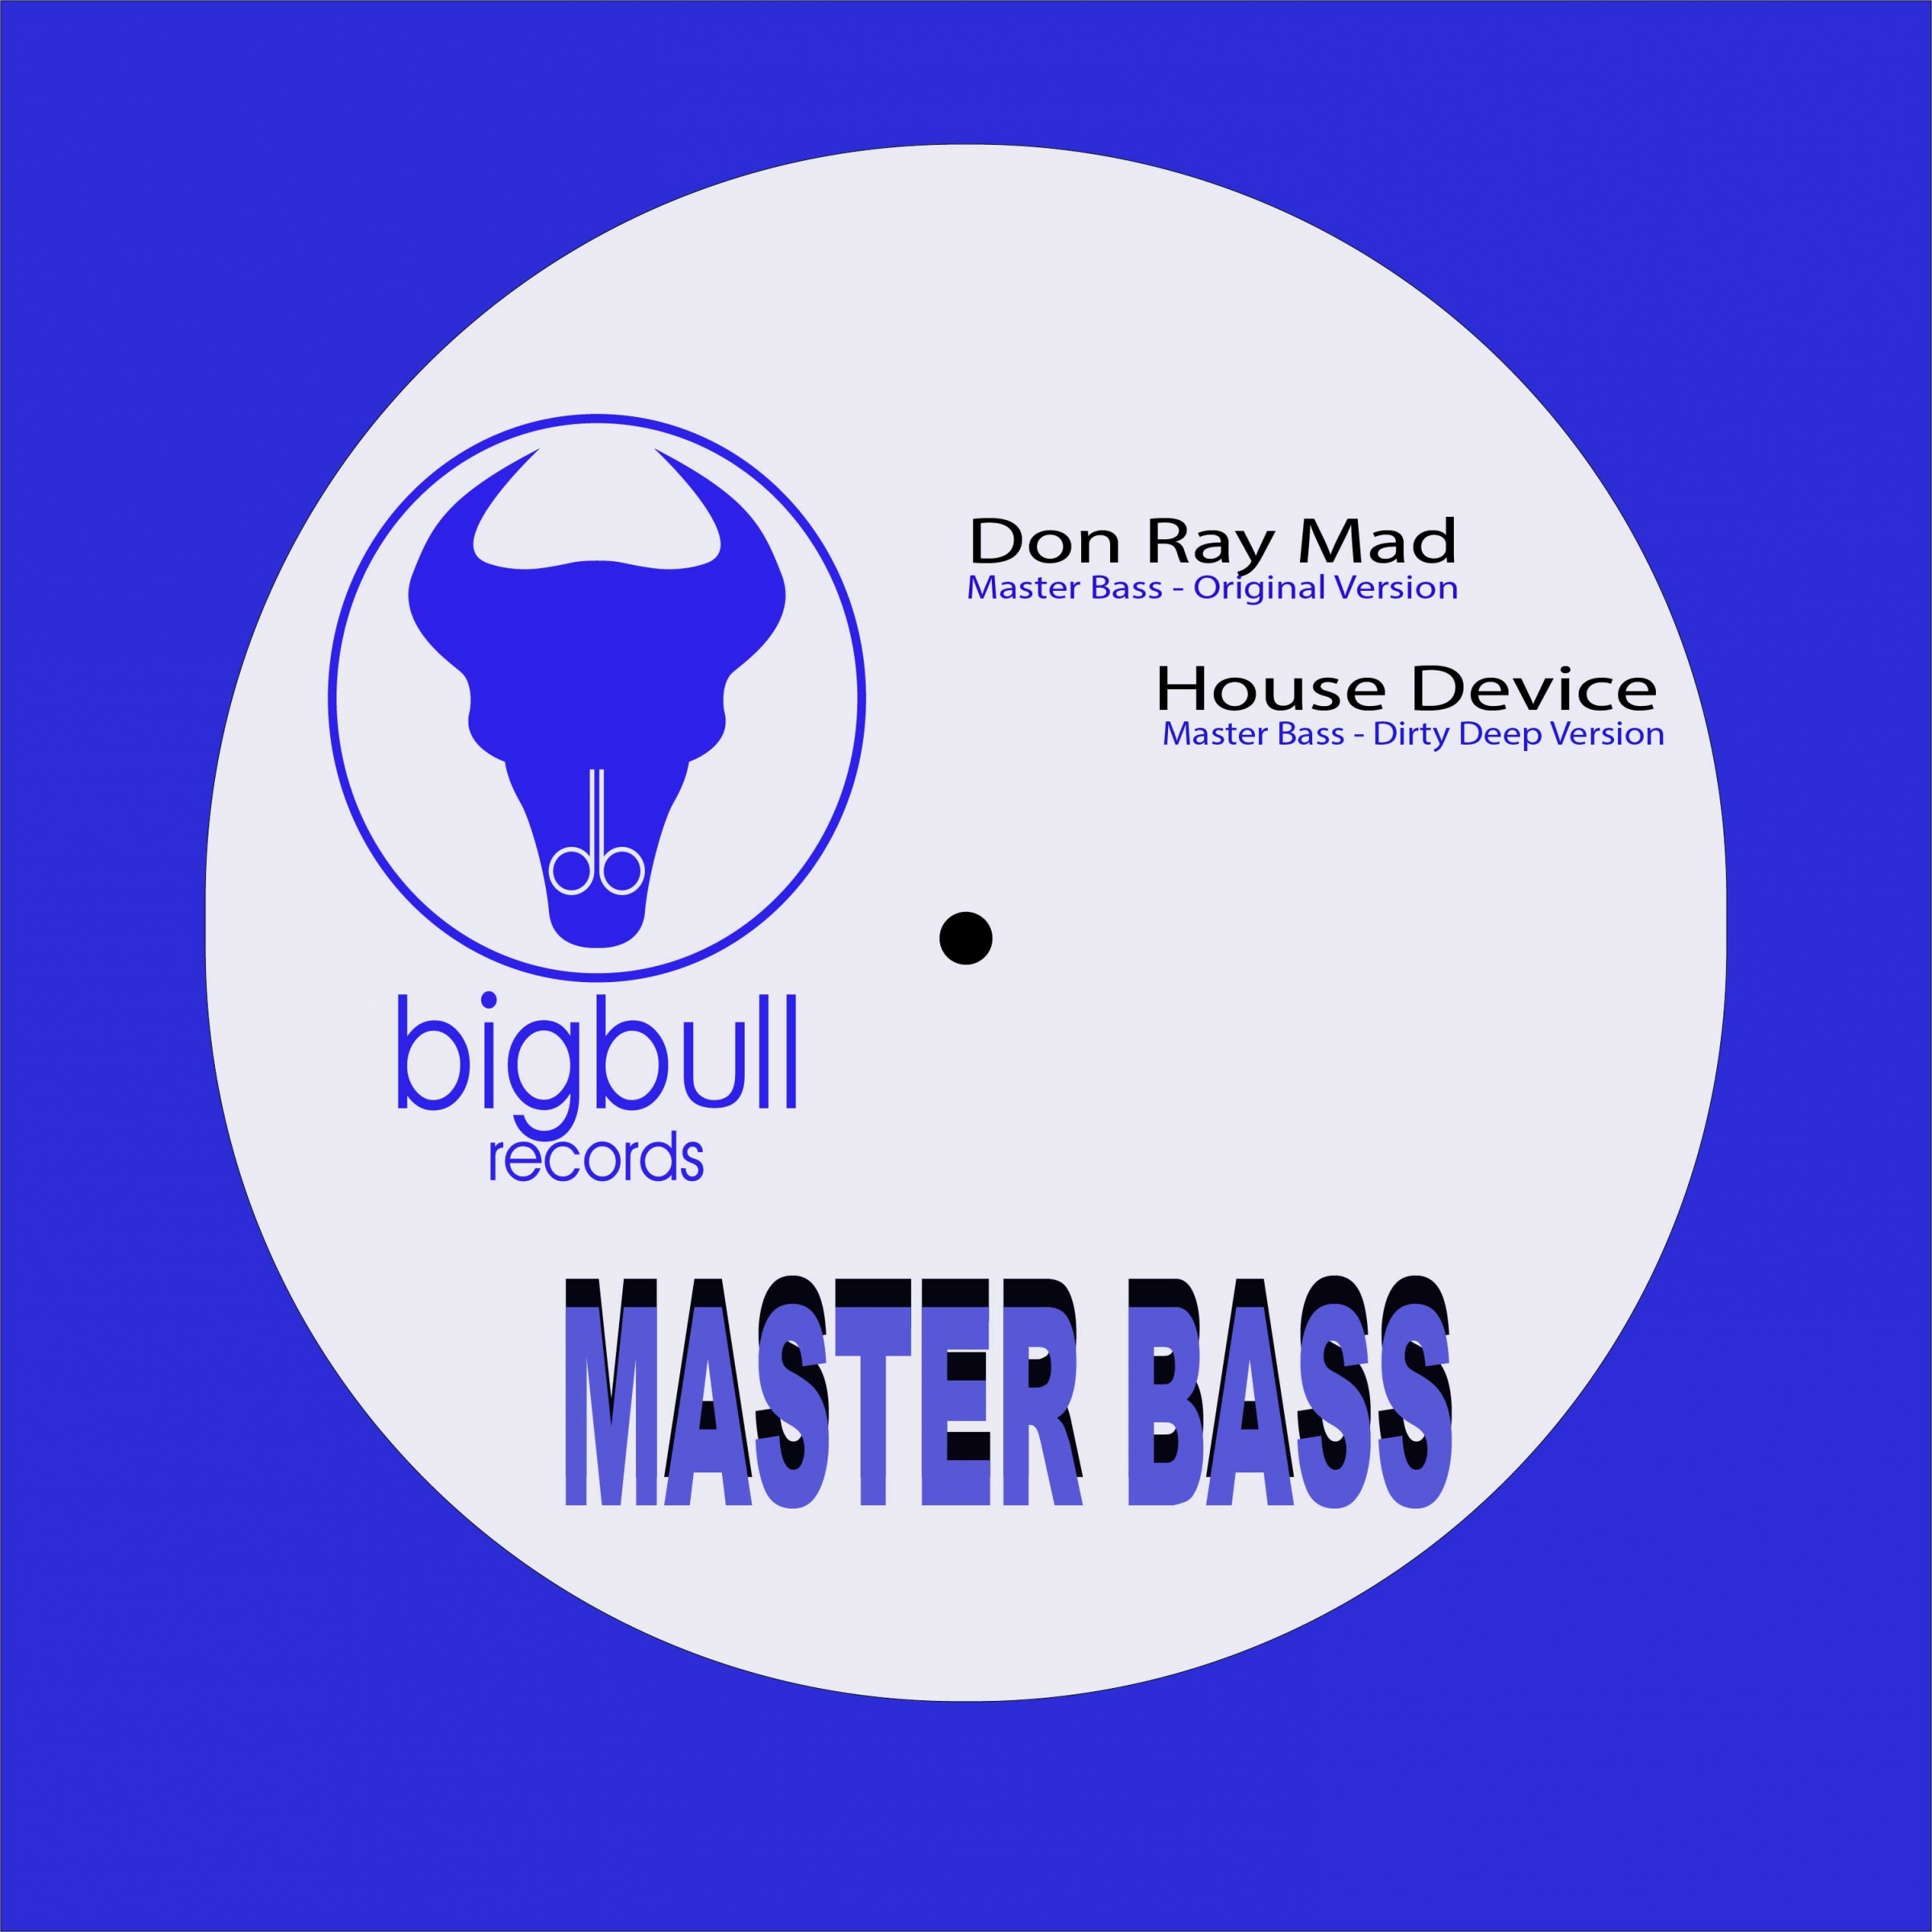 Don ray. Mad House. Mad Master. Дон Bass мес. Bass master